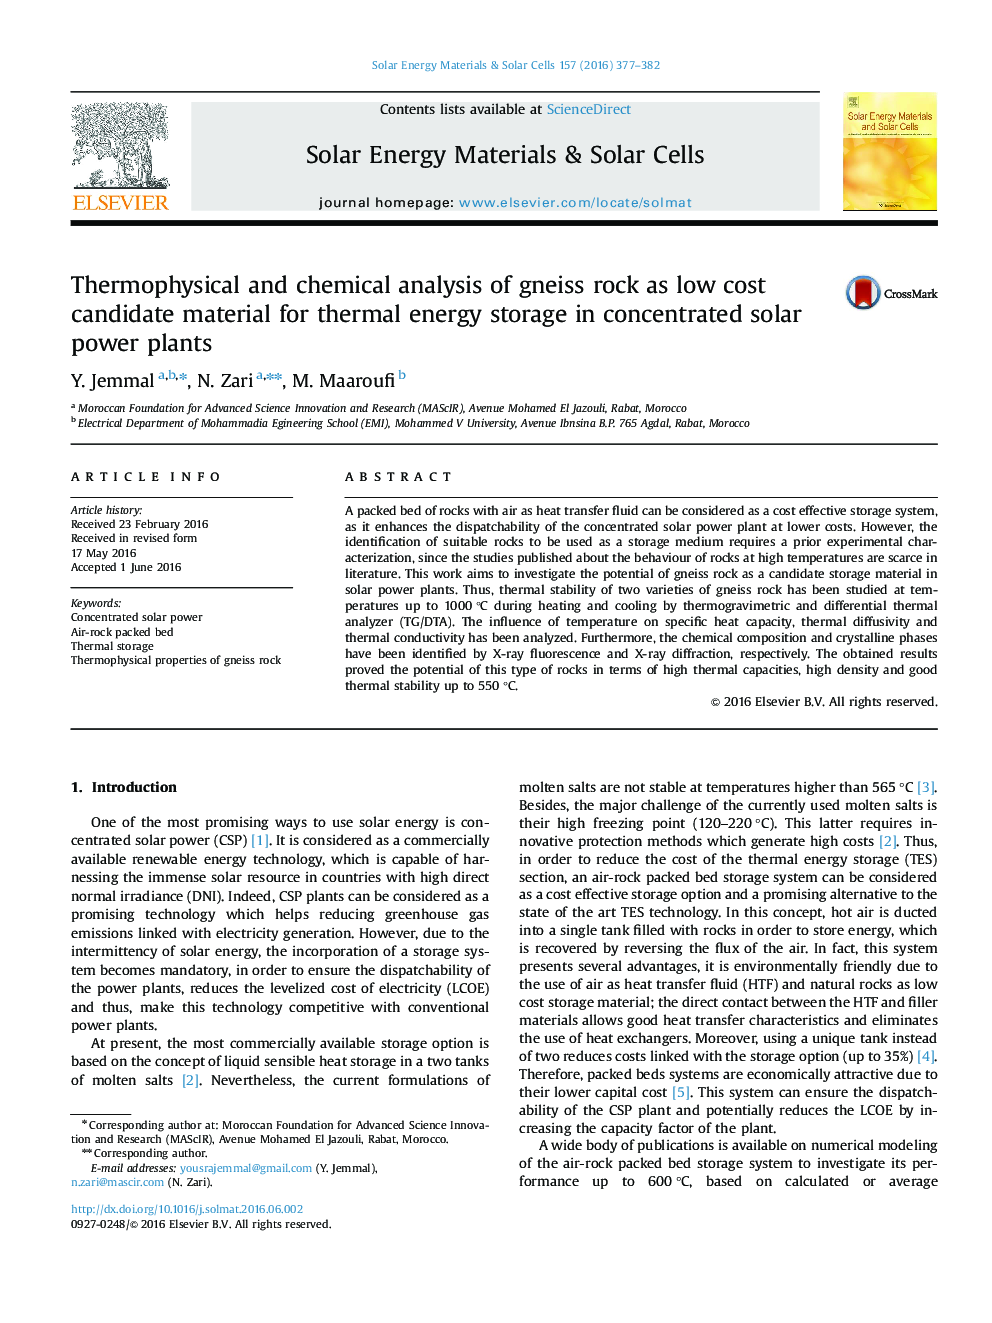 Thermophysical and chemical analysis of gneiss rock as low cost candidate material for thermal energy storage in concentrated solar power plants